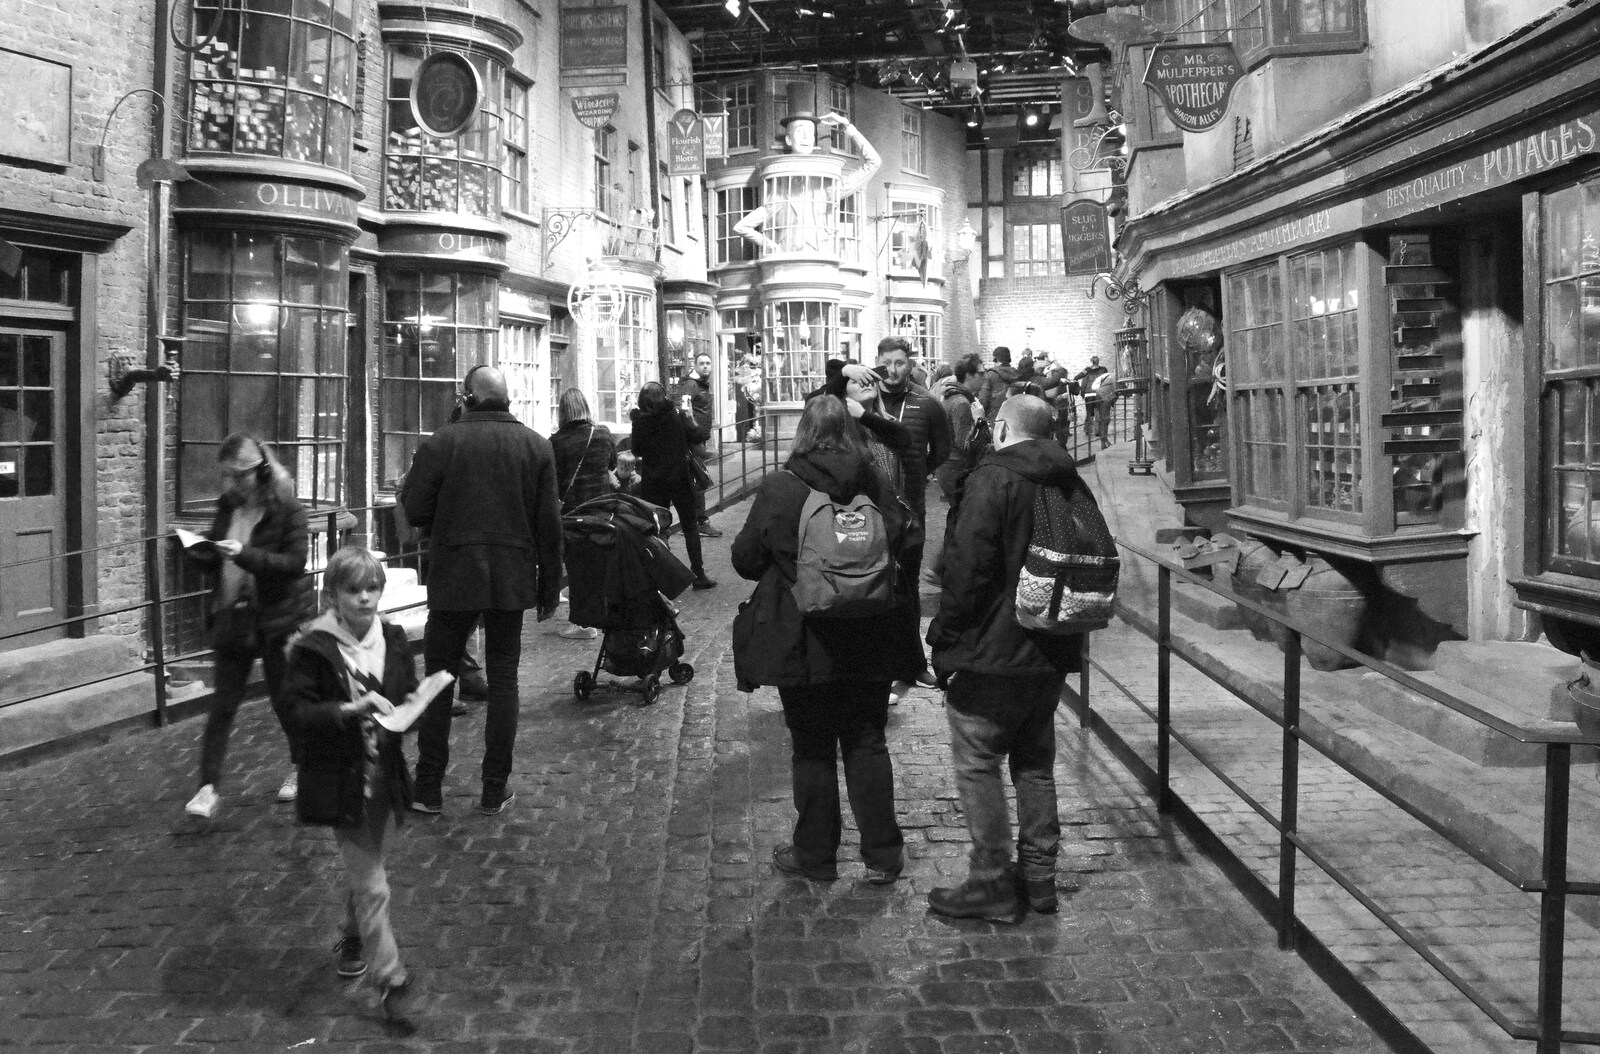 Roaming around on Diagon Alley from A Trip to Harry Potter World, Leavesden, Hertfordshire - 16th February 2020